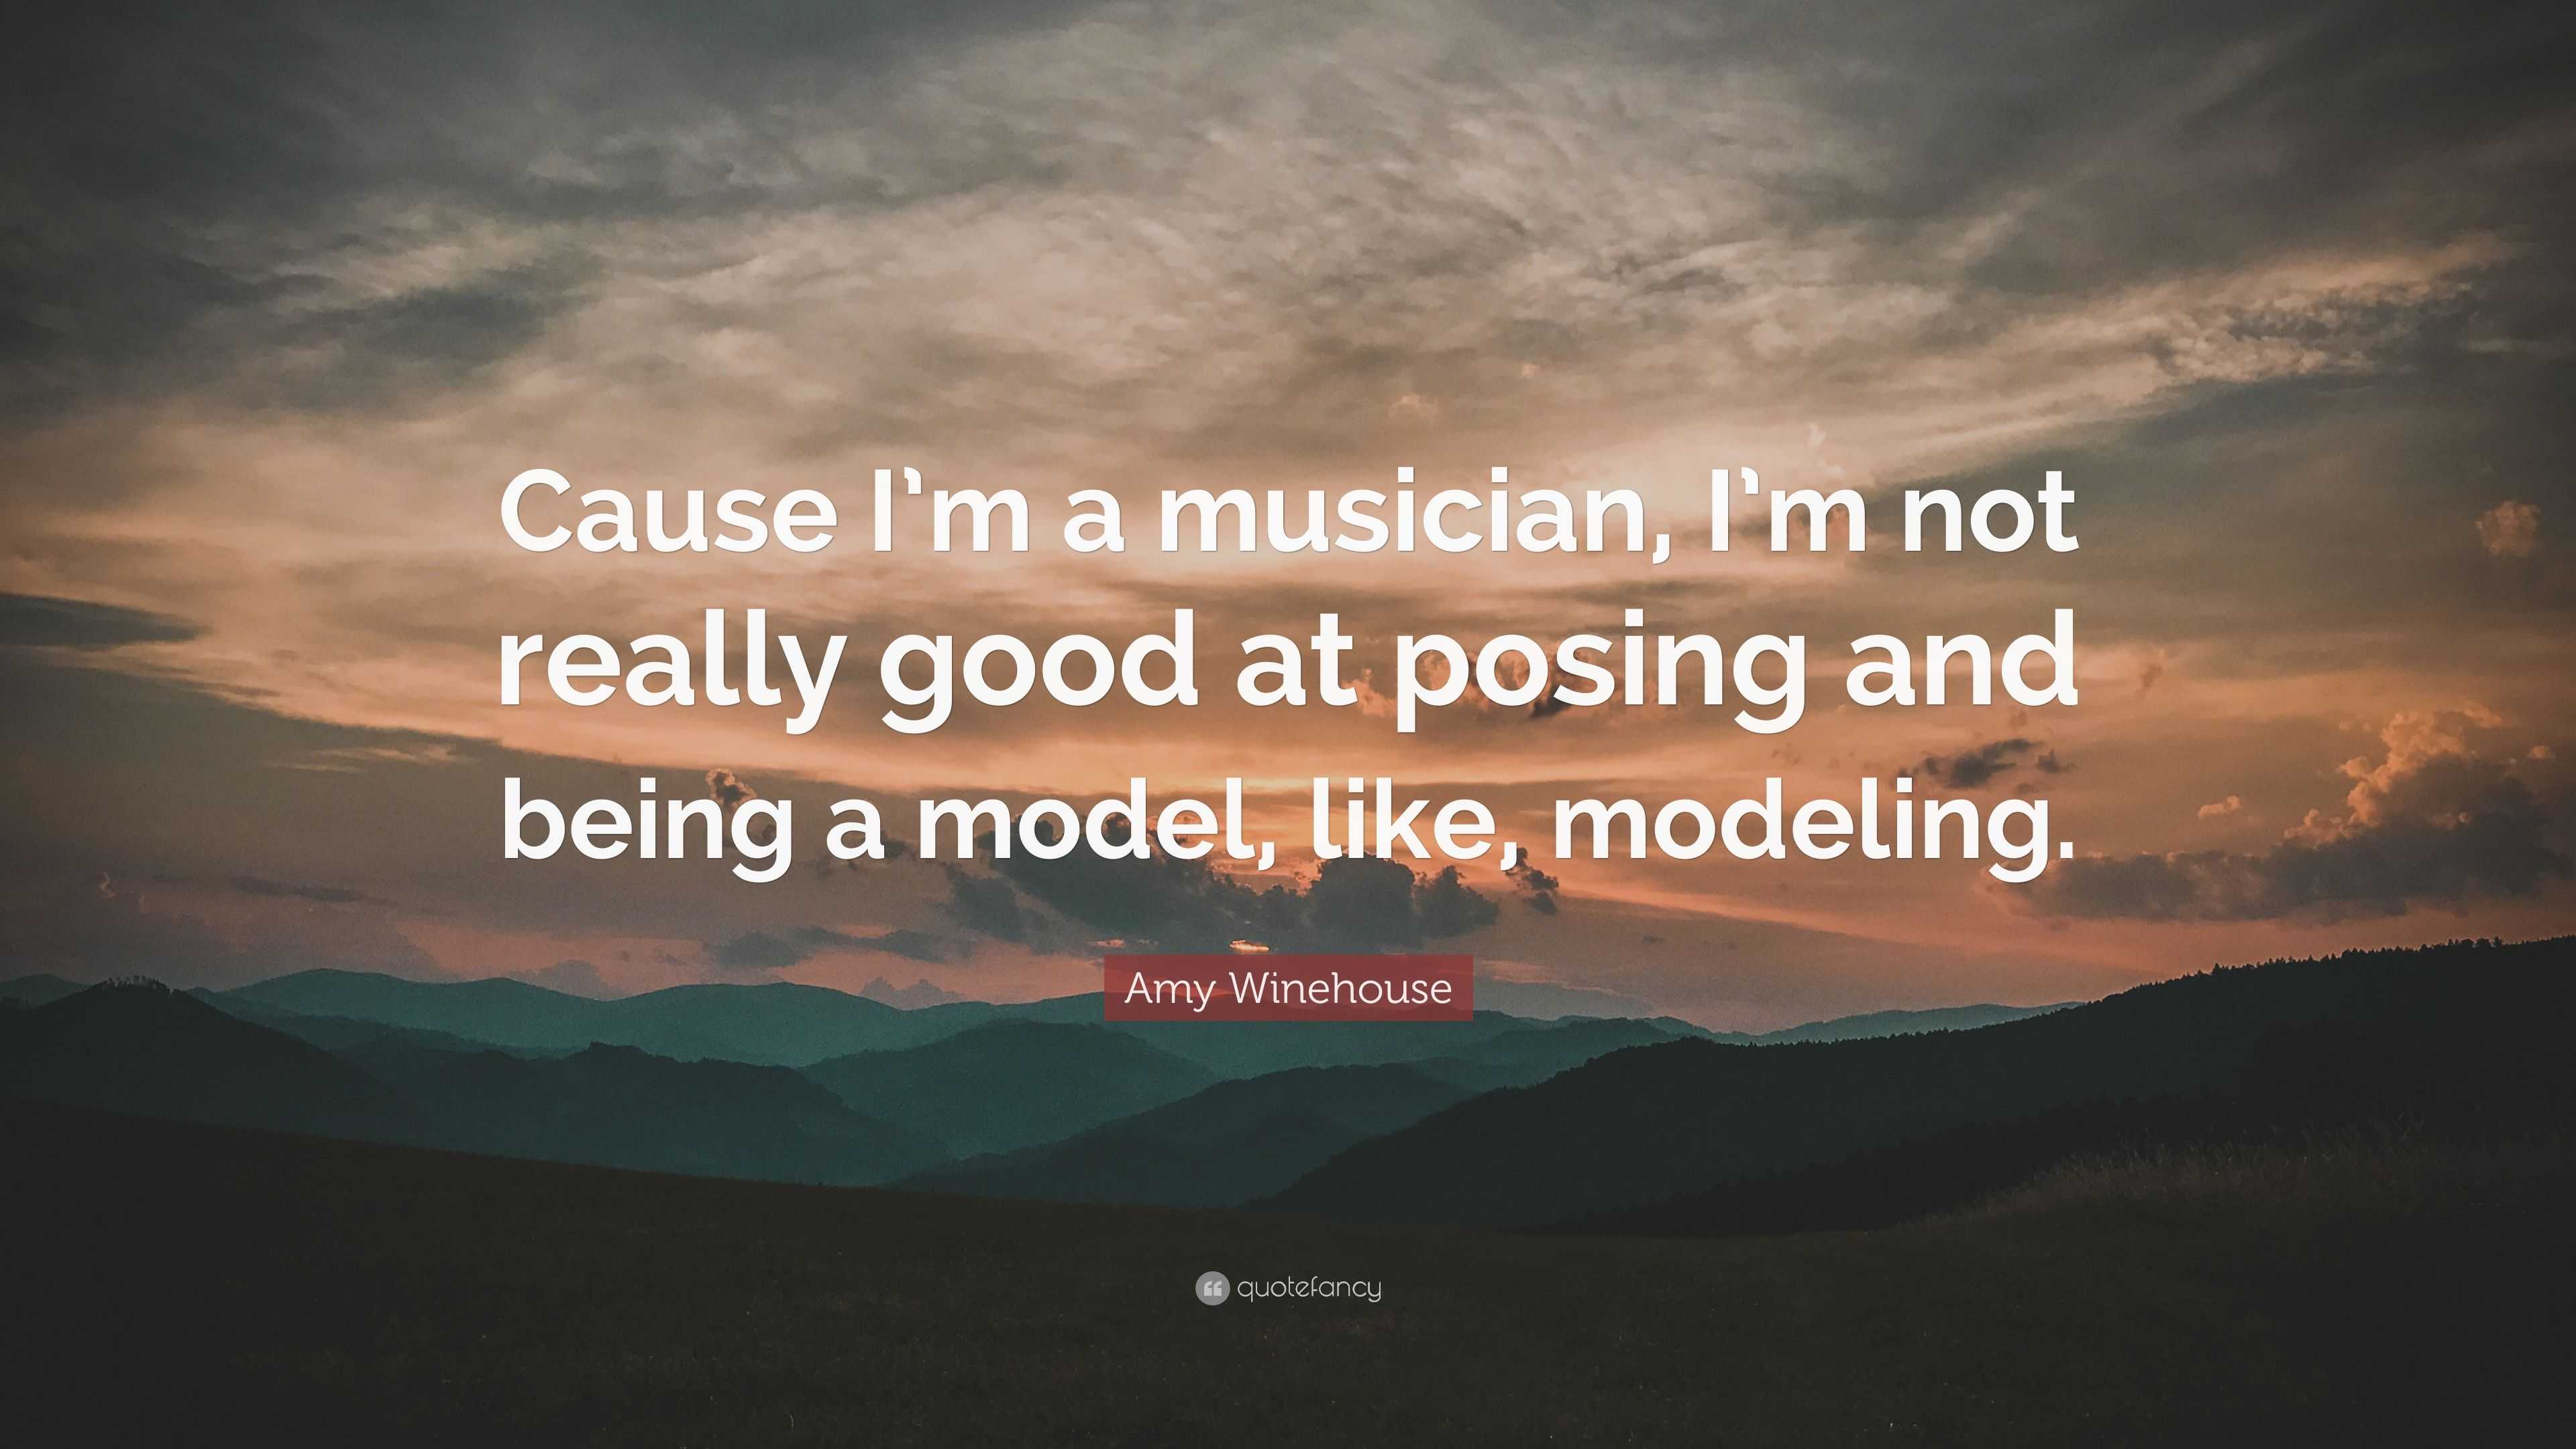 Amy Winehouse Quote: Cause I'm a musician, I'm not really good at posing  and being a model, like, modeling.